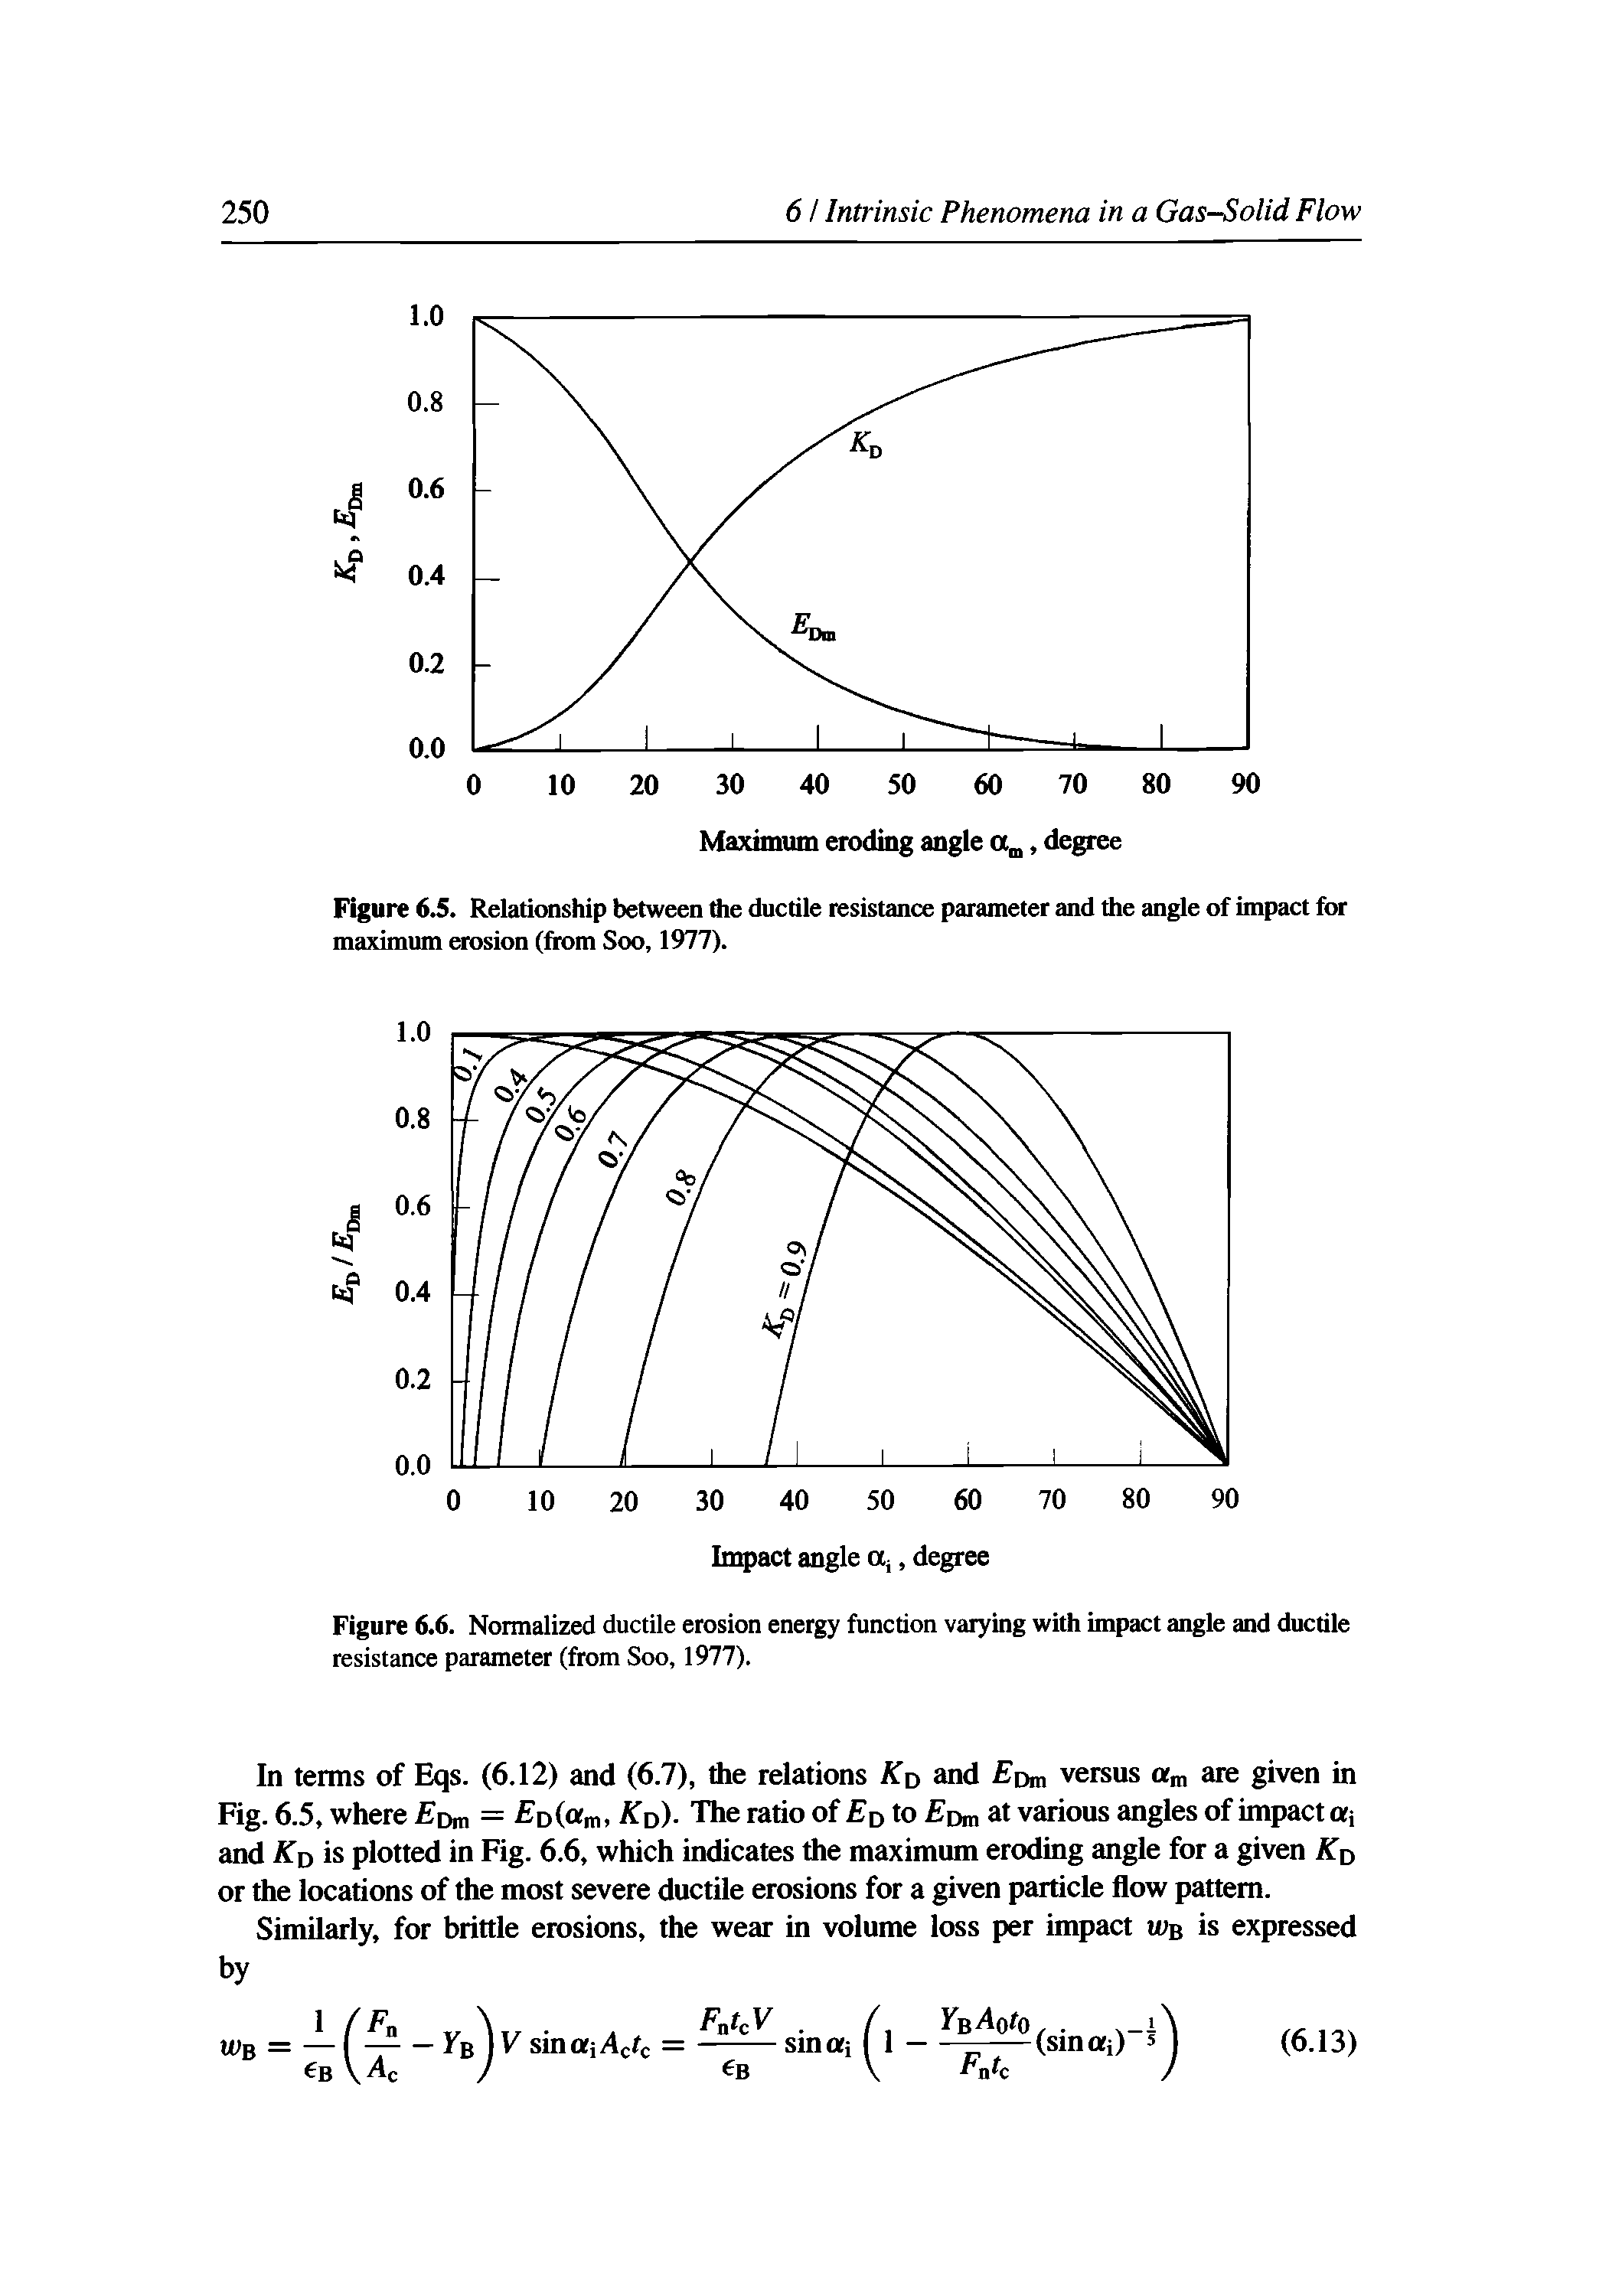 Figure 6.6. Normalized ductile erosion energy function varying with impact angle and ductile resistance parameter (from Soo, 1977).